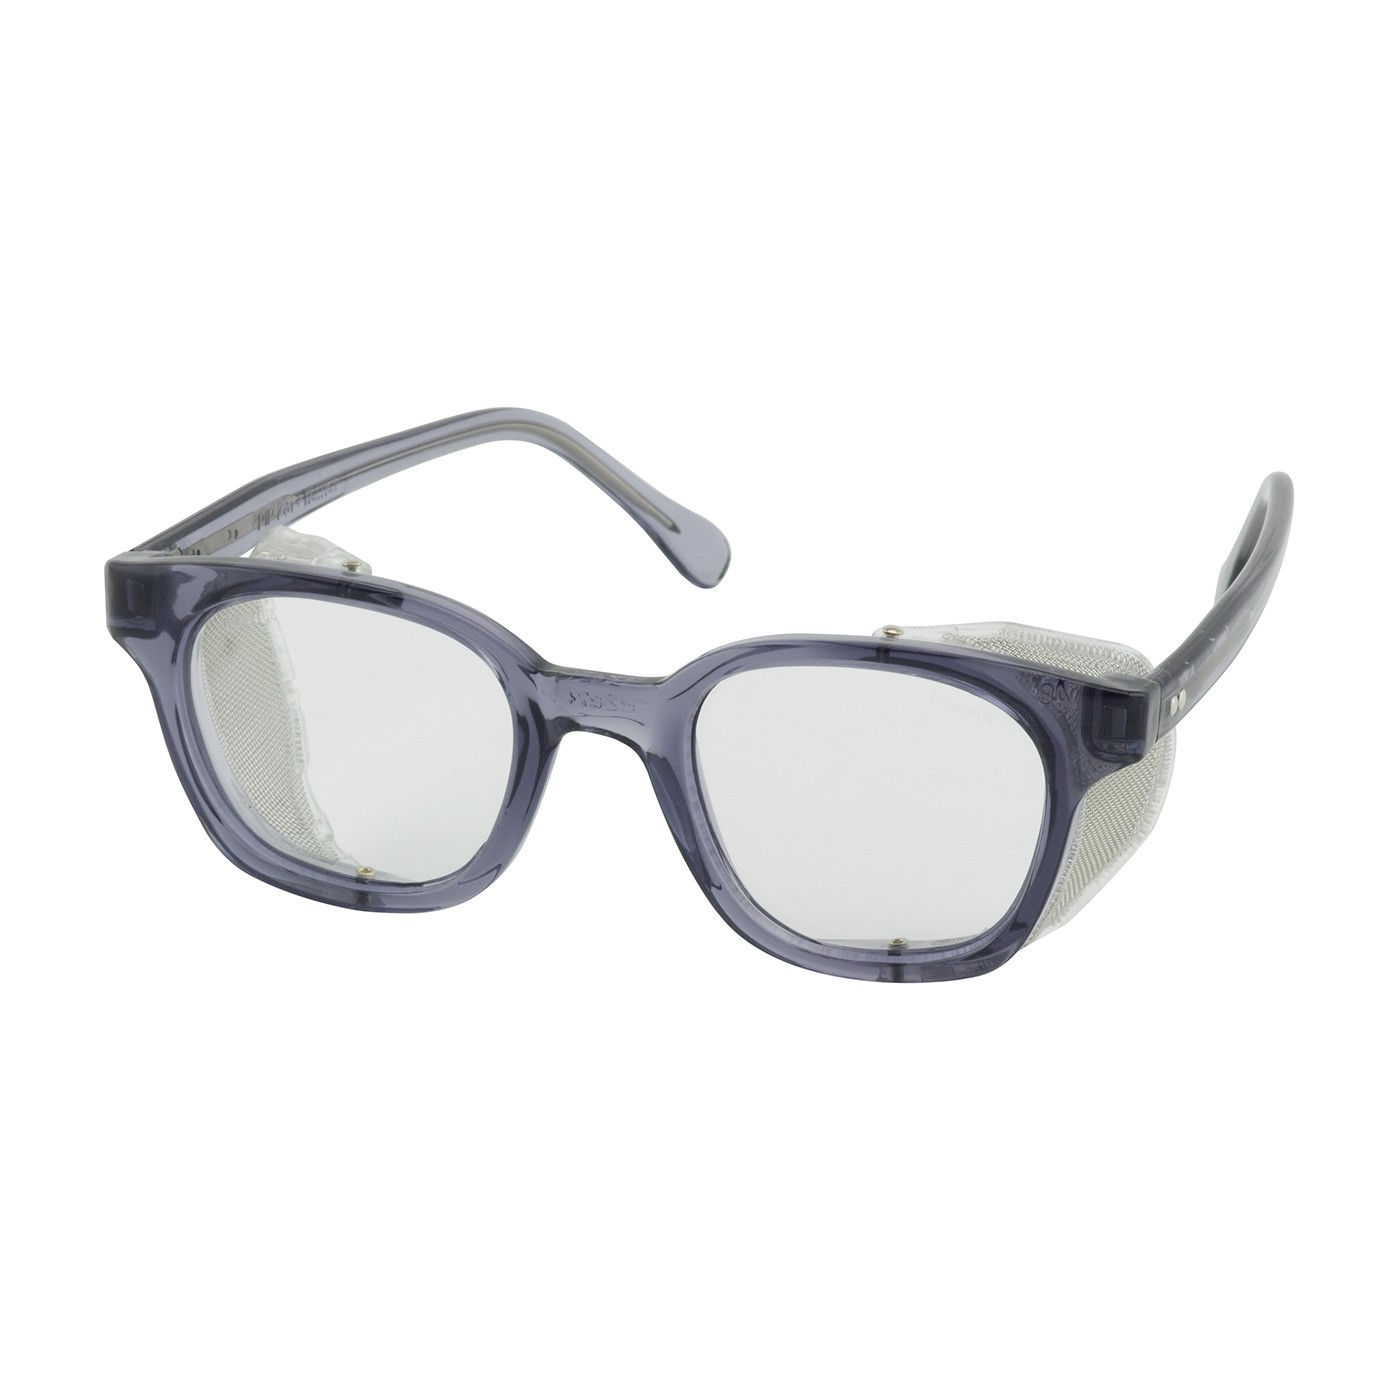 Traditional Spectacle Full Frame Safety Glasses with Smoke Frame, Clear Lens and Anti-Scratch / Anti-Fog Coating  (#249-5907-400)